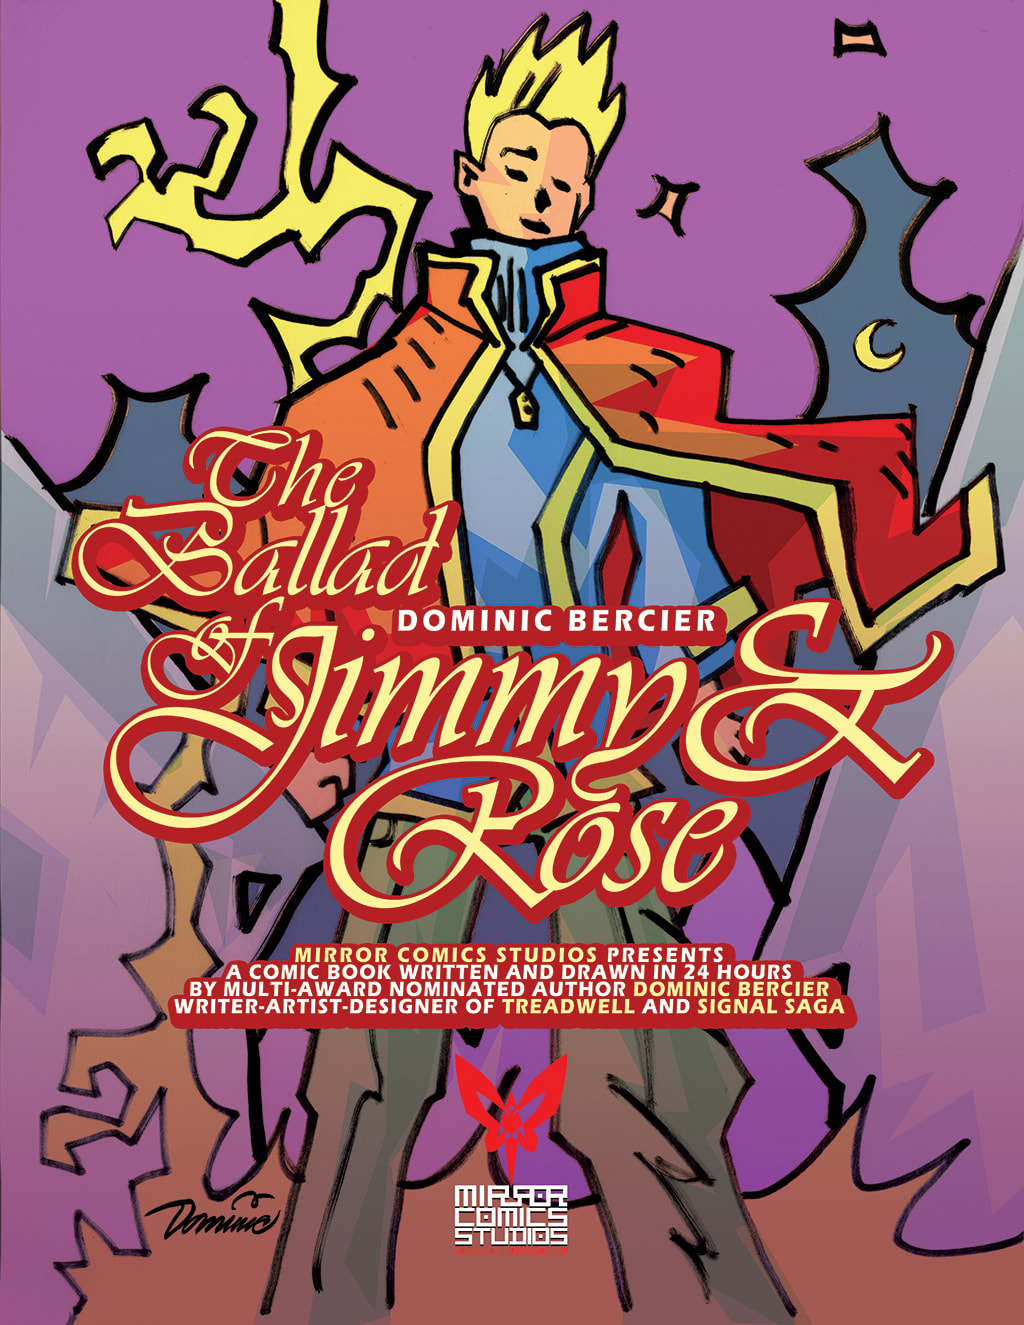 The Ballad of Jimmy and Rose COVER by Dominic Bercier